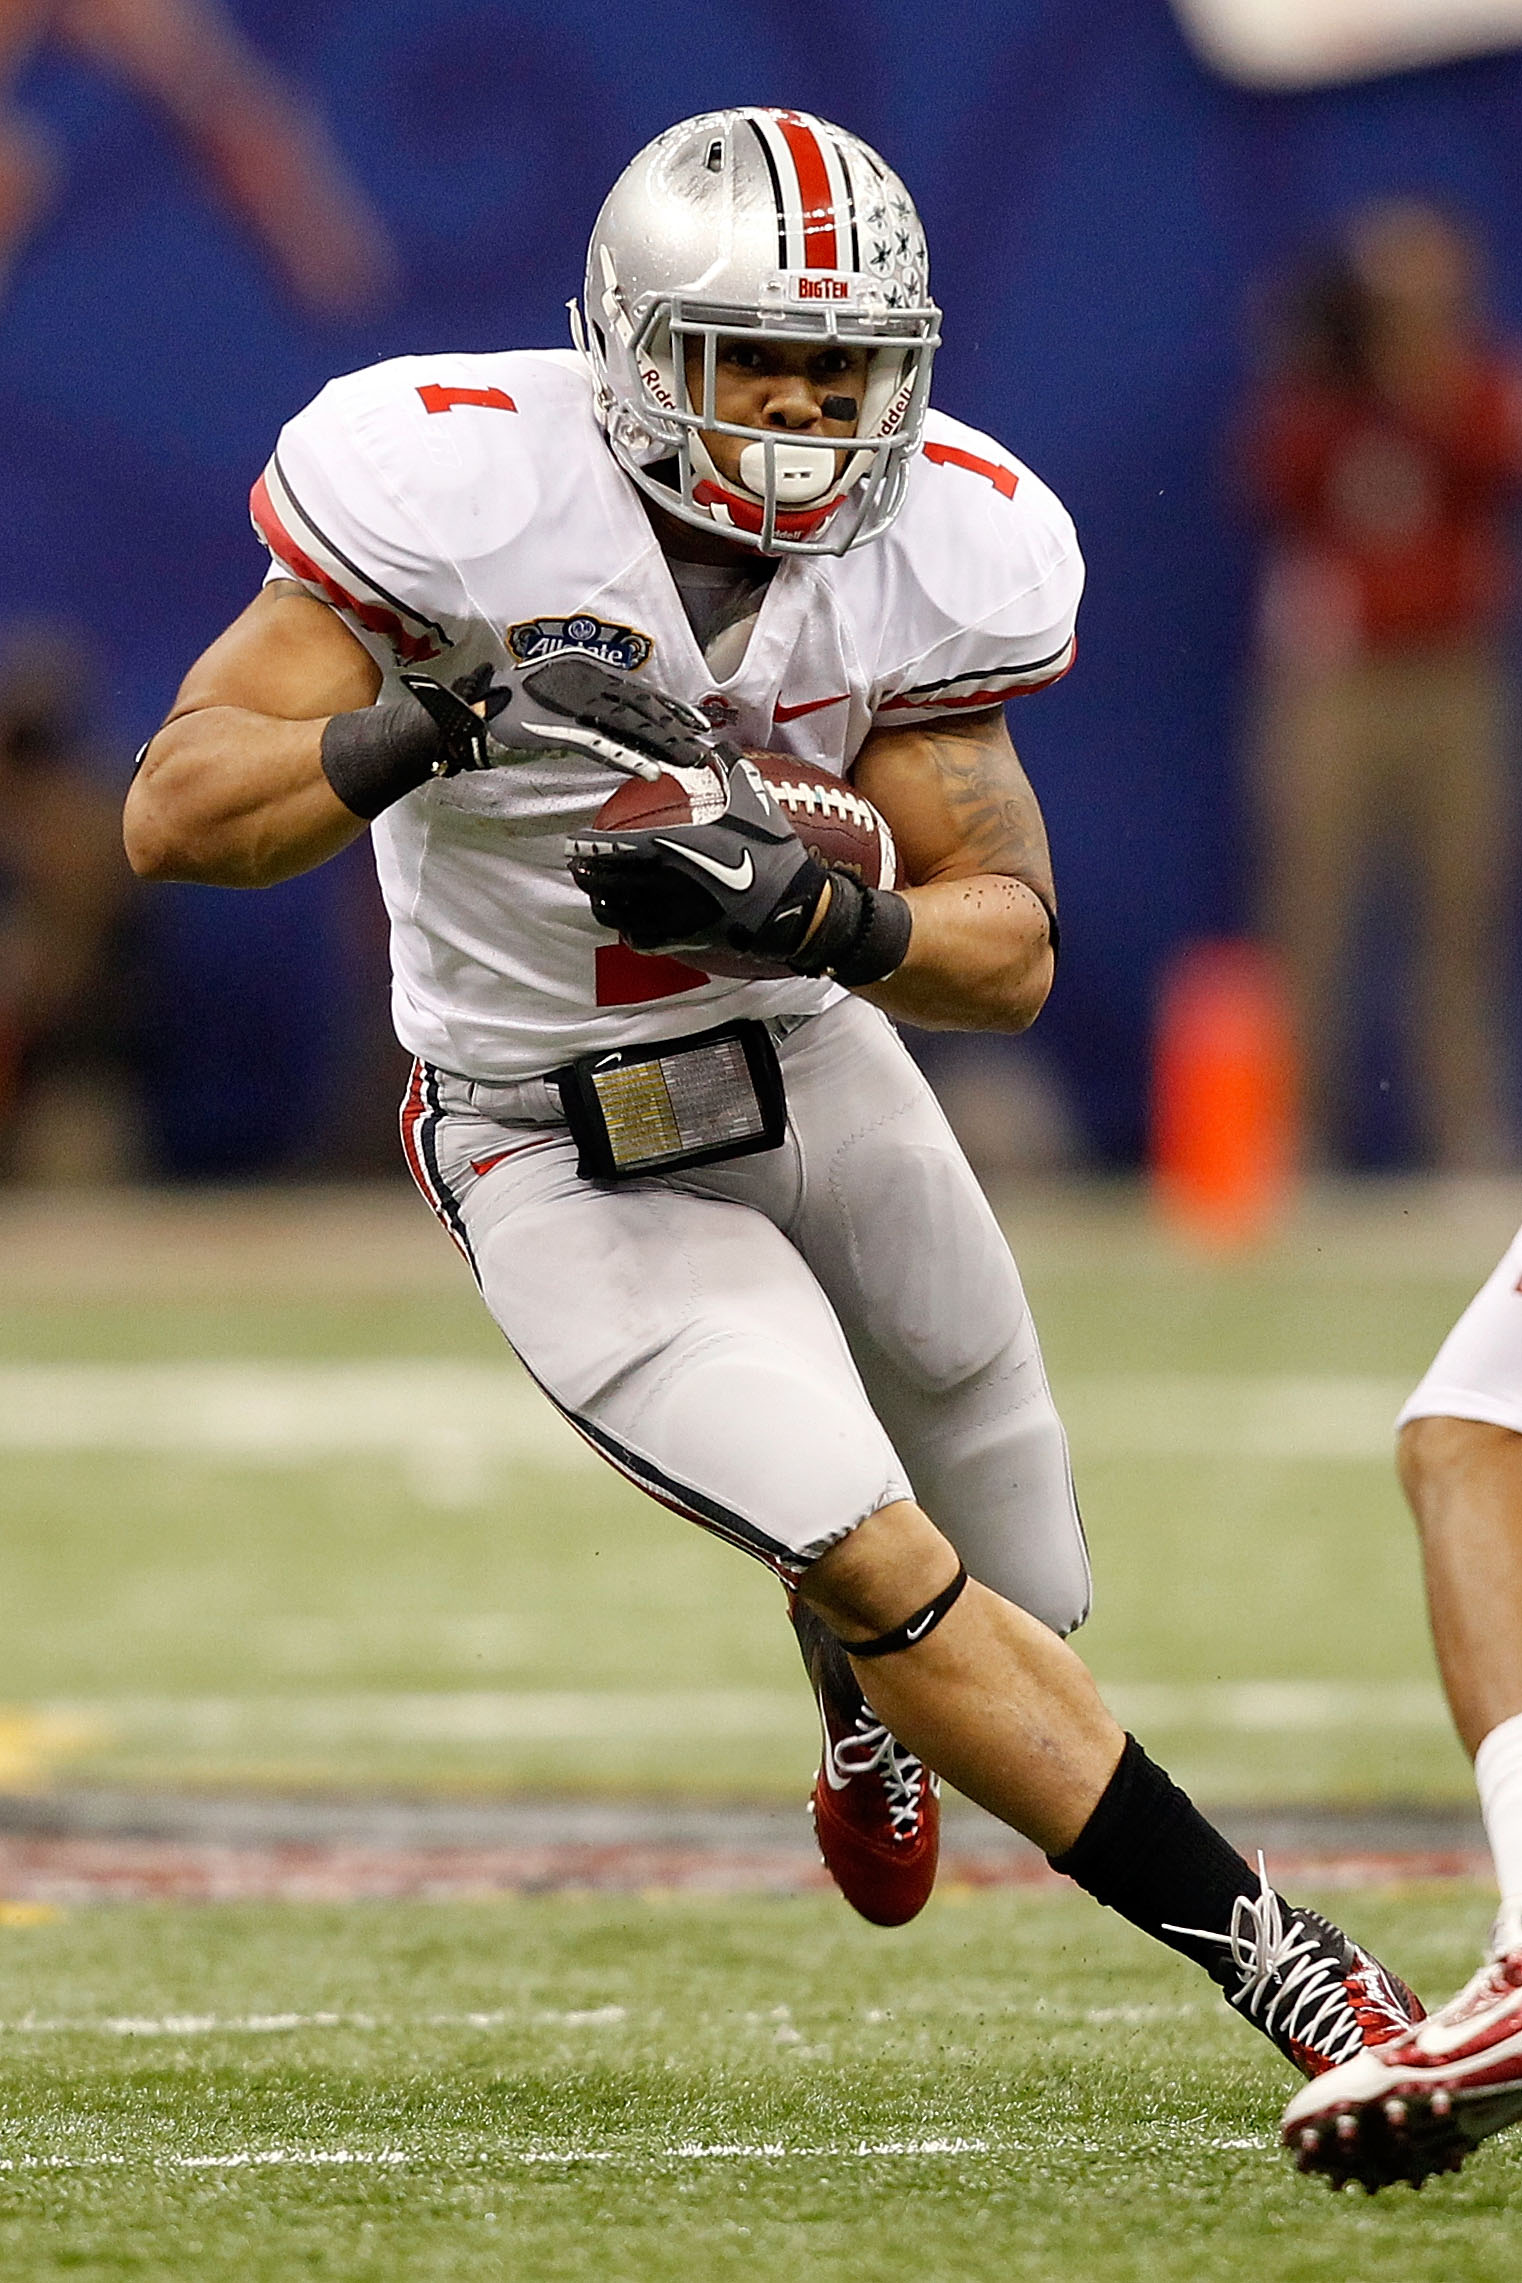 NEW ORLEANS, LA - JANUARY 04:  Dan Herron #1 of the Ohio State Buckeyes runs the ball against the Arkansas Razorbacks during the Allstate Sugar Bowl at the Louisiana Superdome on January 4, 2011 in New Orleans, Louisiana.  (Photo by Matthew Stockman/Getty